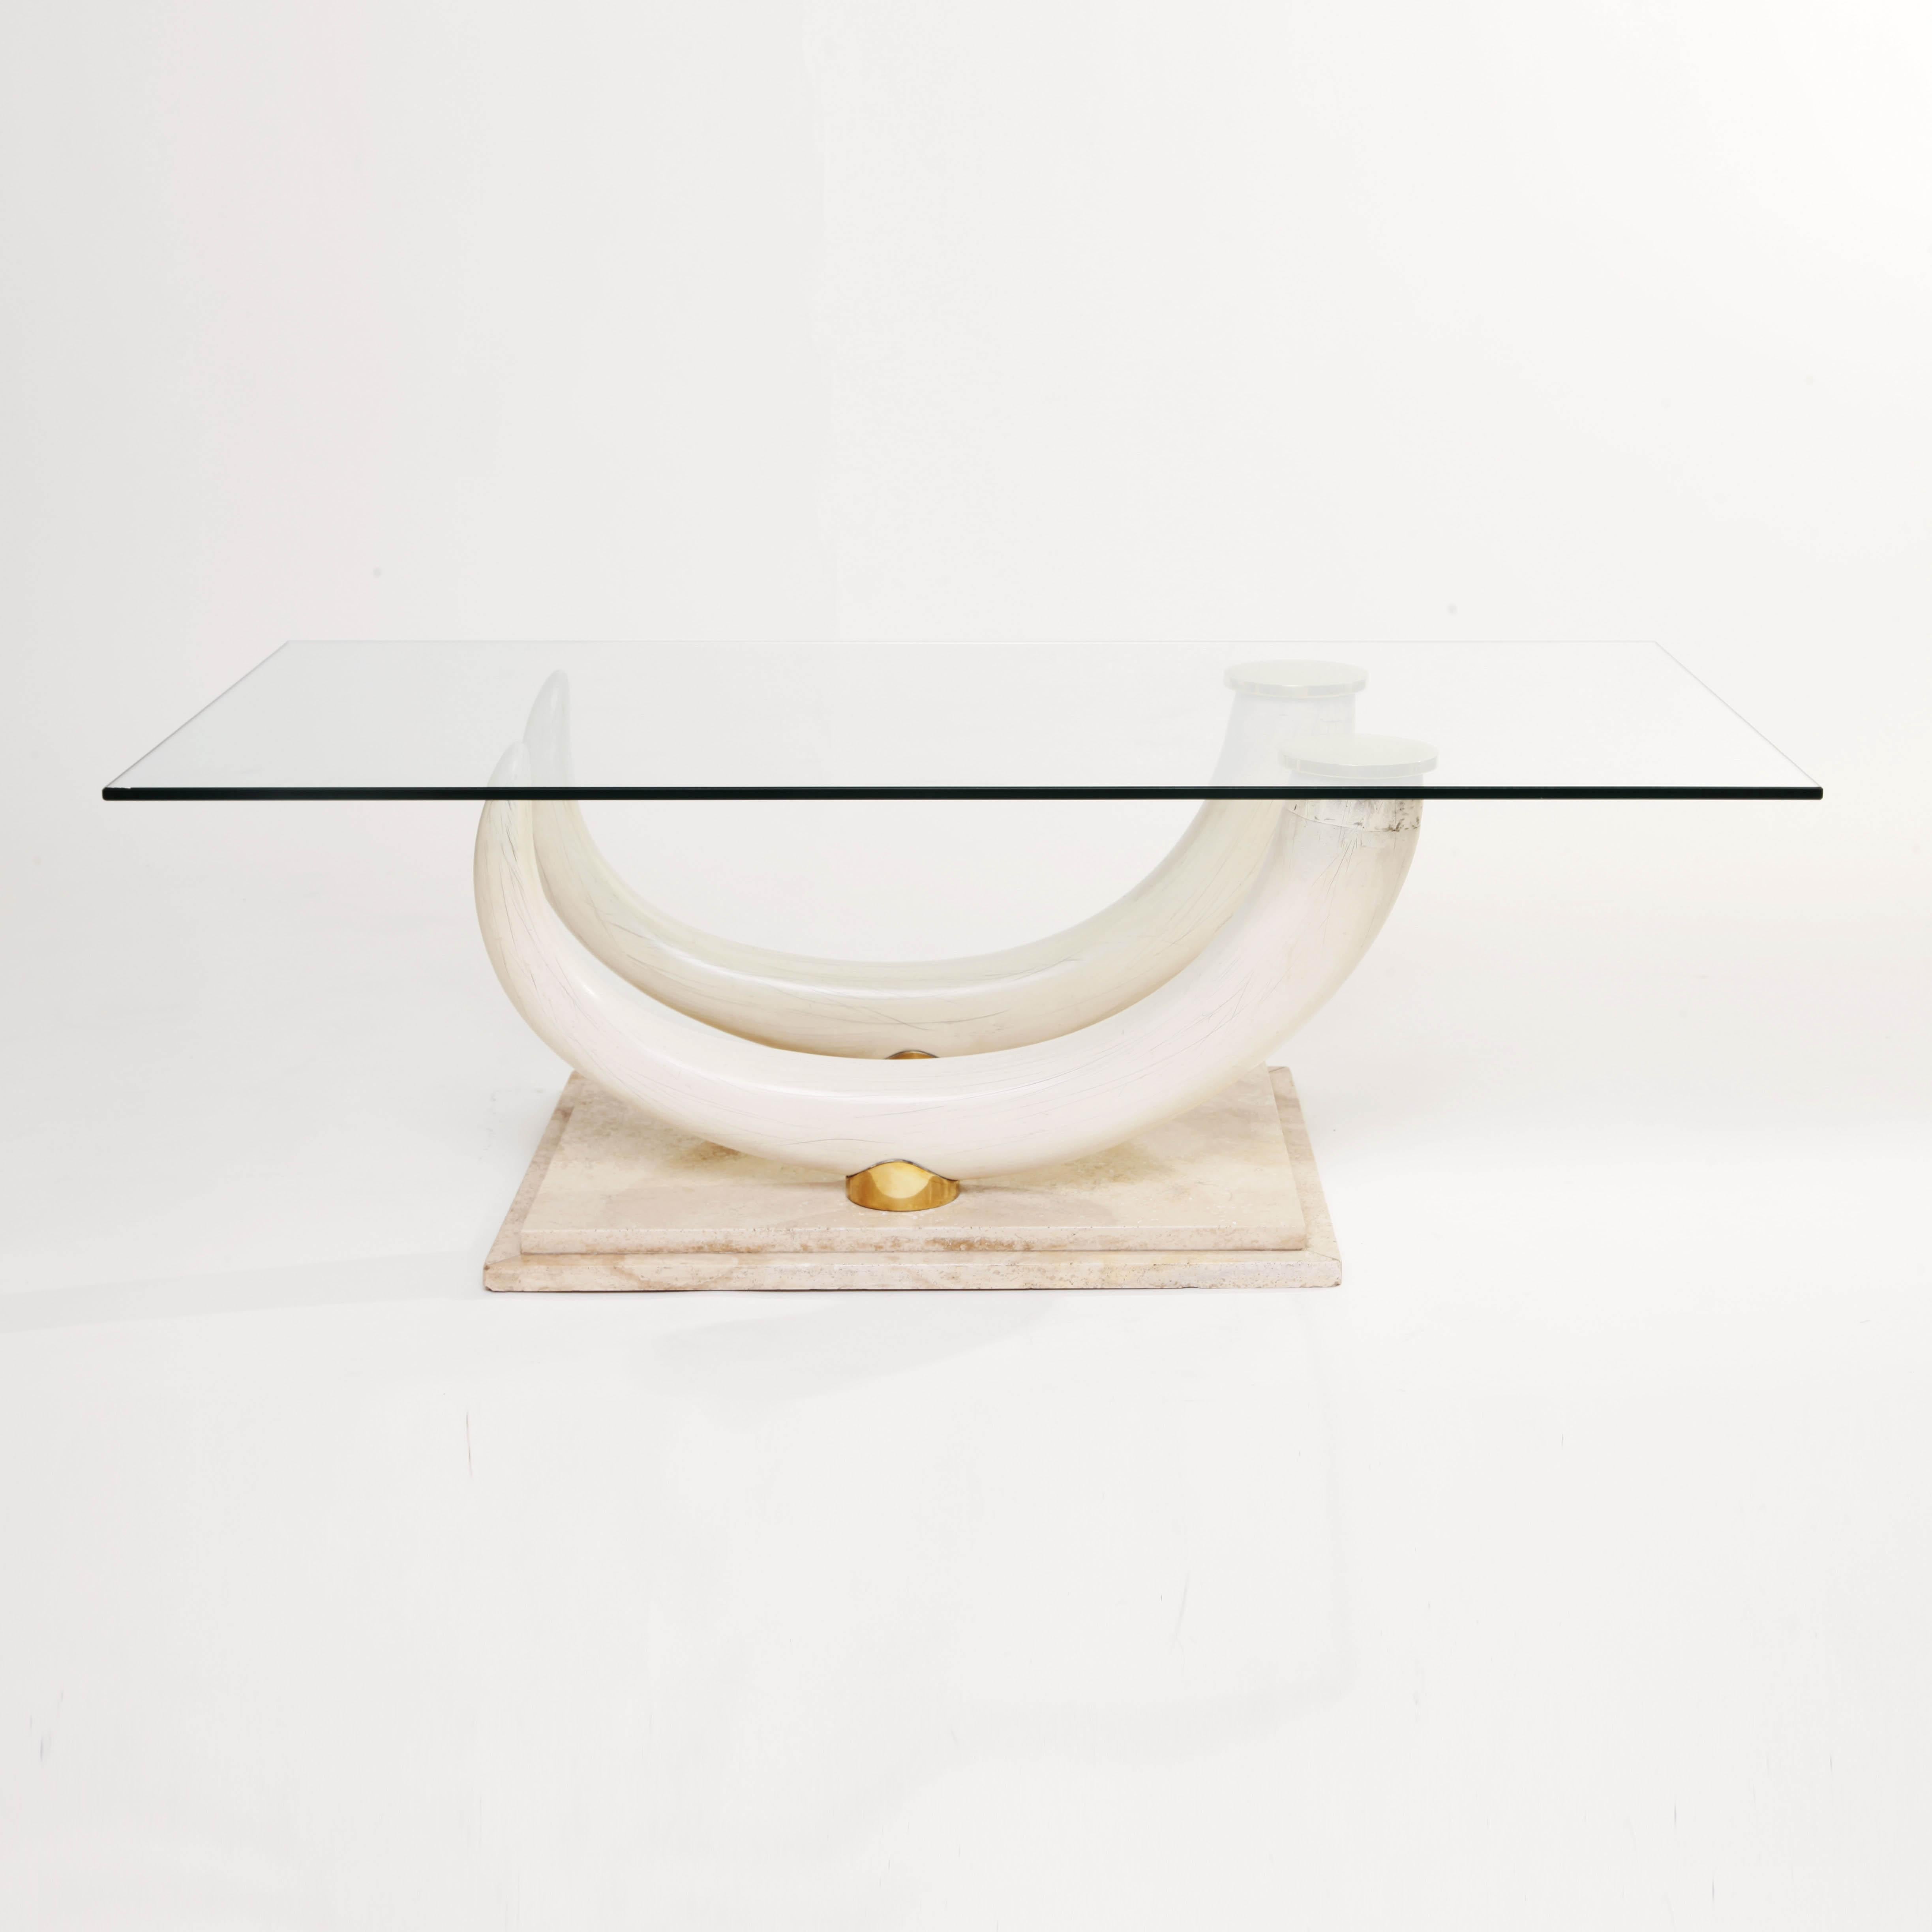 A unique coffee table designed by Maison Jansen and manufactured by Ralph Pucci collections, Italy. Travertine stepped base with faux elephant tusks and brass joins. Clear glass top. Signed on the brass fixings.
     